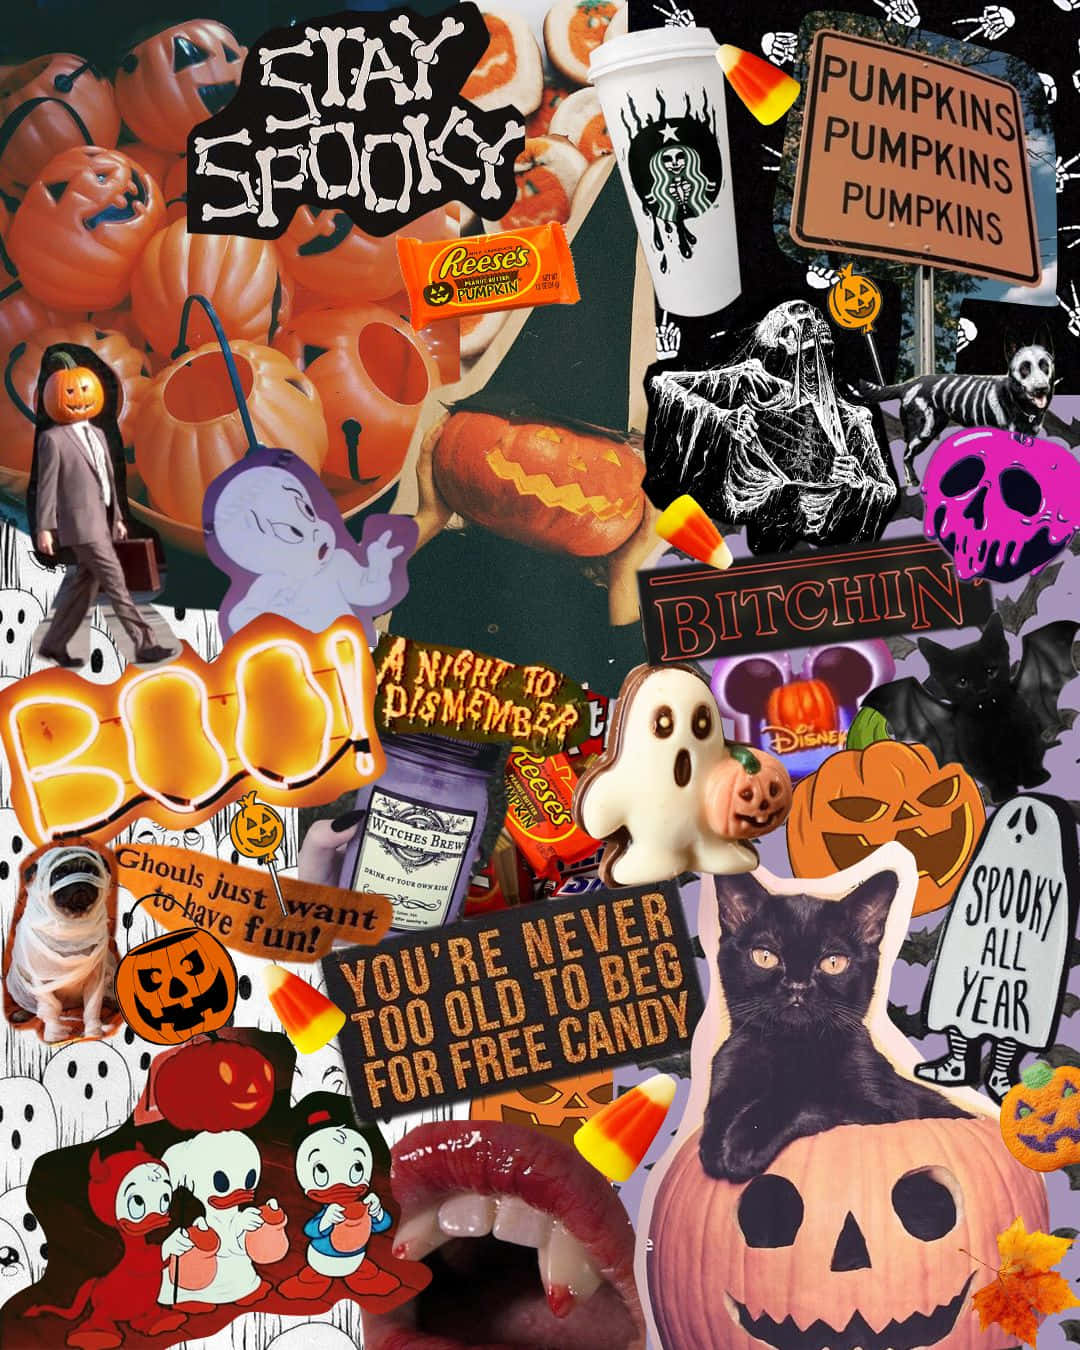 Get spooky this Halloween with creative costumes and decorations Wallpaper